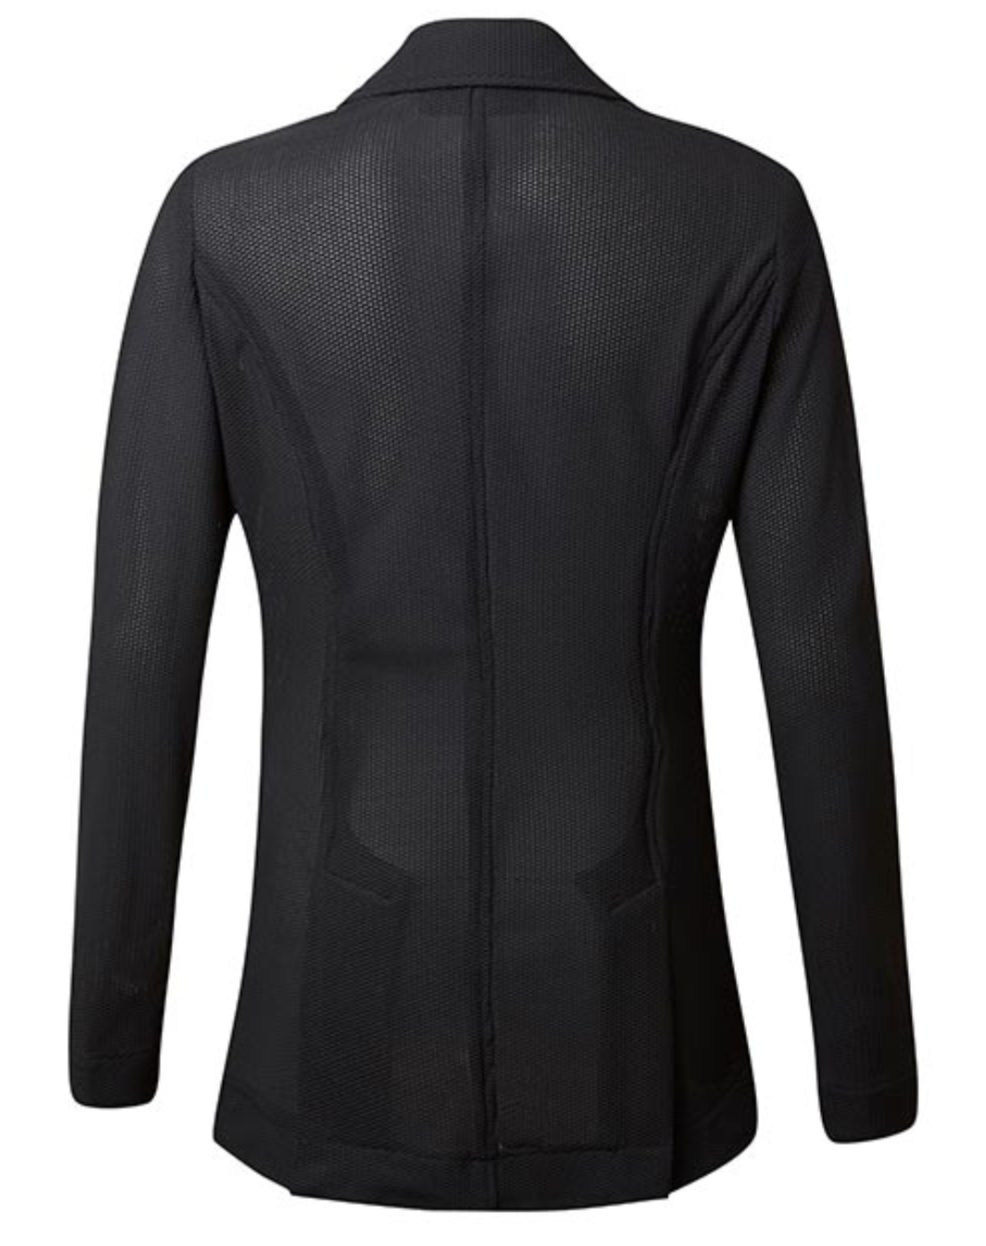 aa motionlite competition jacket